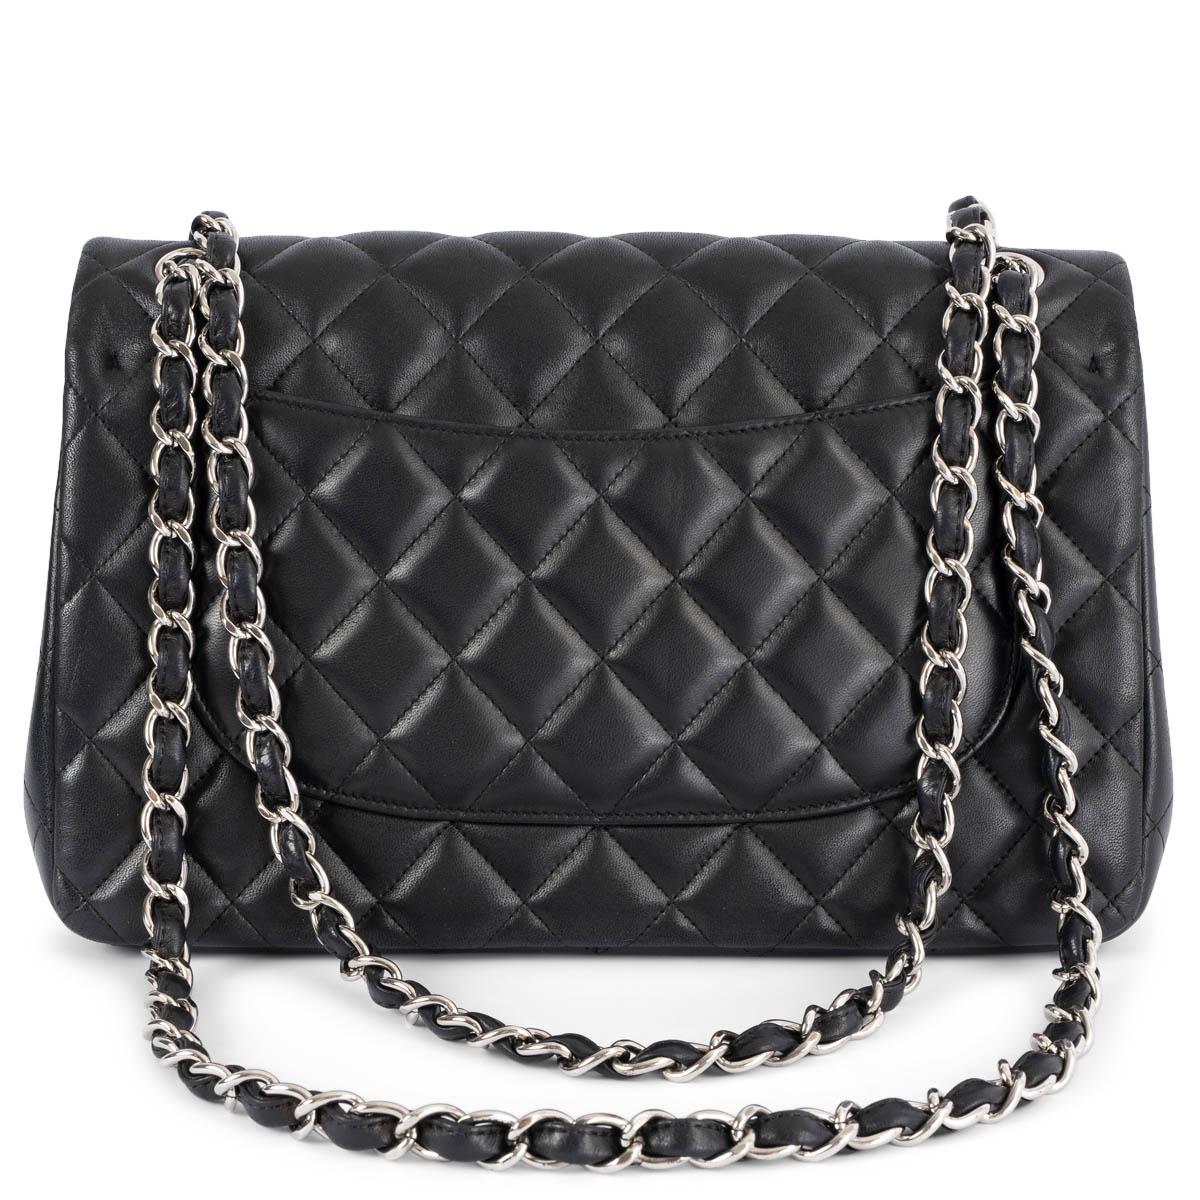 Black CHANEL black quilted lambskin leather TIMELESS CLASSIC LARGE Flap Shoulder Bag For Sale